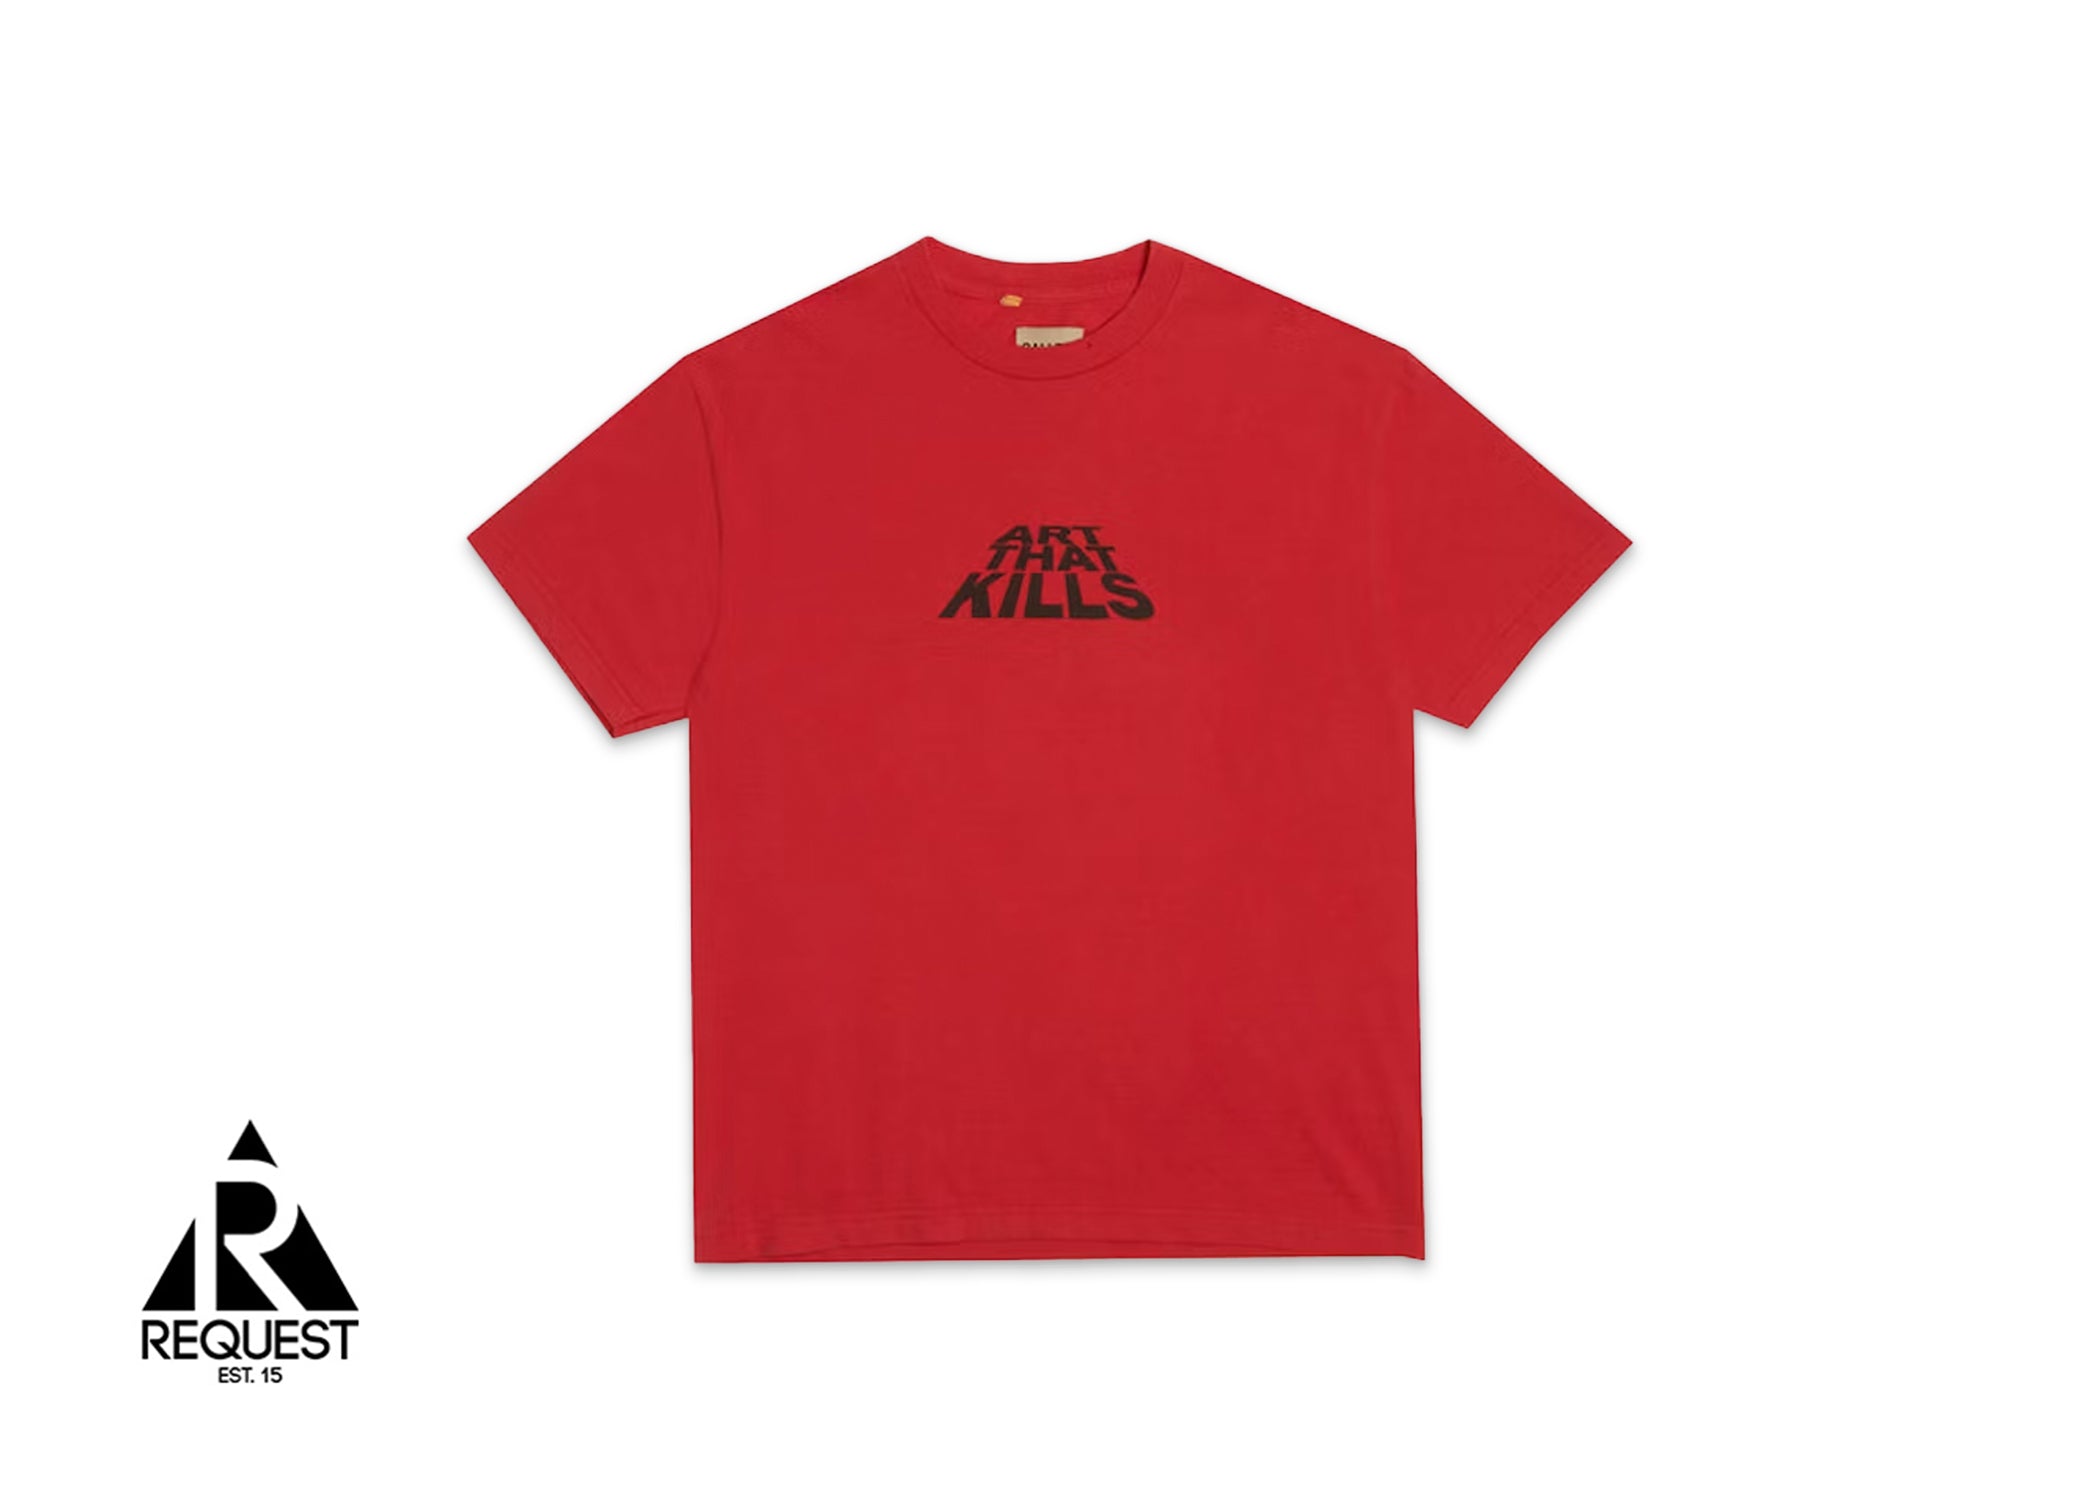 Gallery Dept. ATK Stack Tee "Red"